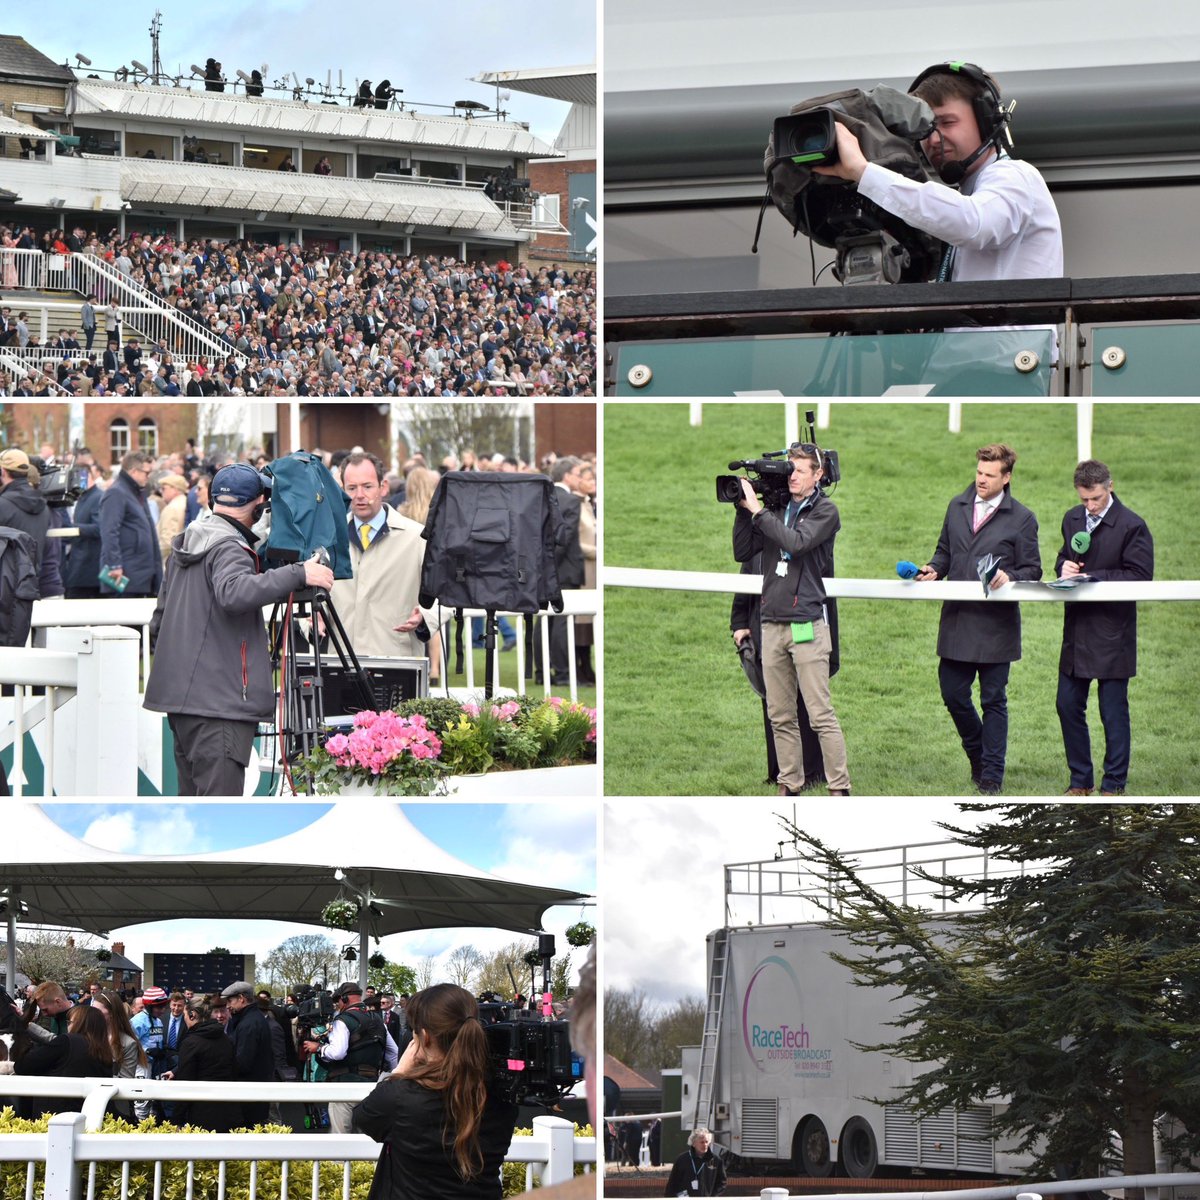 Saturday’s Aintree Grand National - a large OB effort by #Racetech over the 4+ mile course for Racing TV, NEP/ITV Racing & On-course. 

More 📷 on Insta: @challessteve.

#outsidebroadcast @RaceTechUK #GrandNational #Aintree